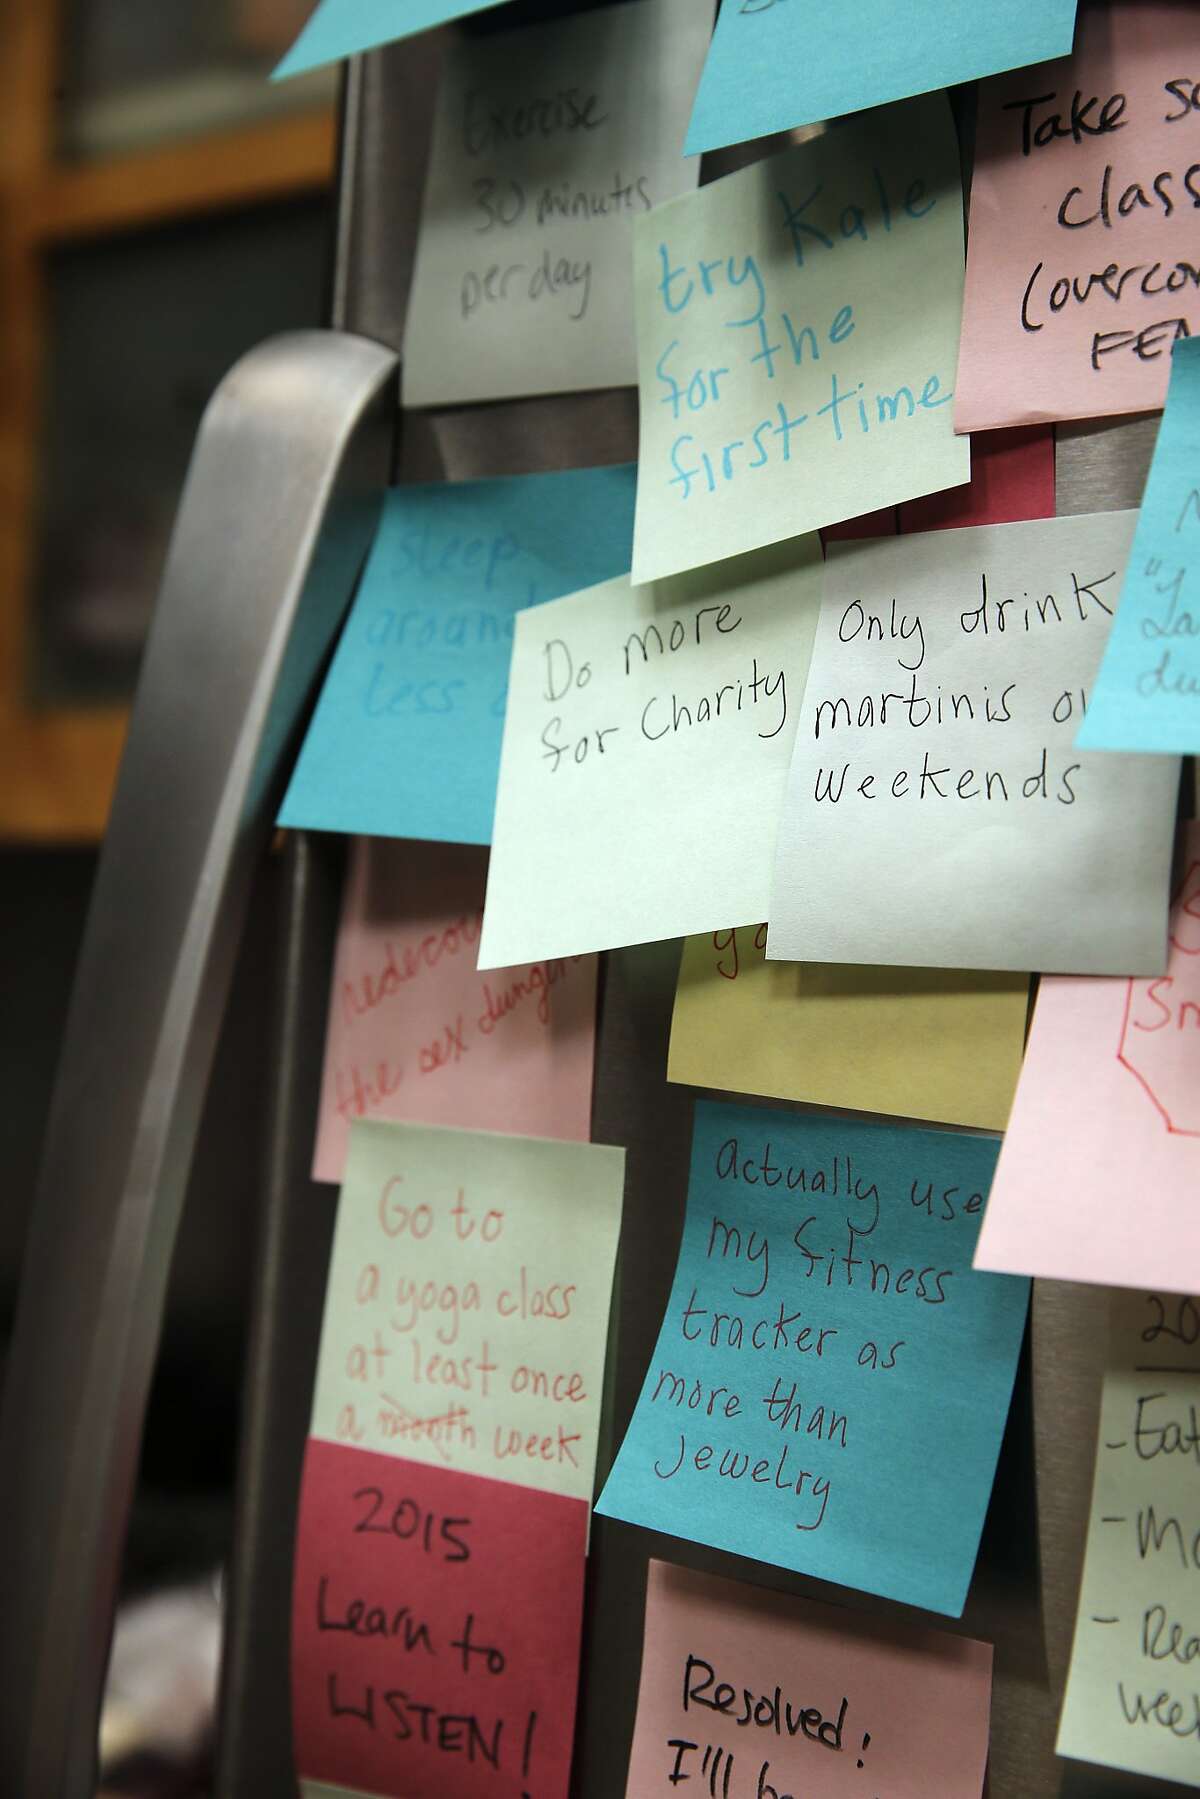 Photo illustration of post-it notes with New Year's resolutions in San Francisco, Calif., on Wednesday, December 23, 2015.